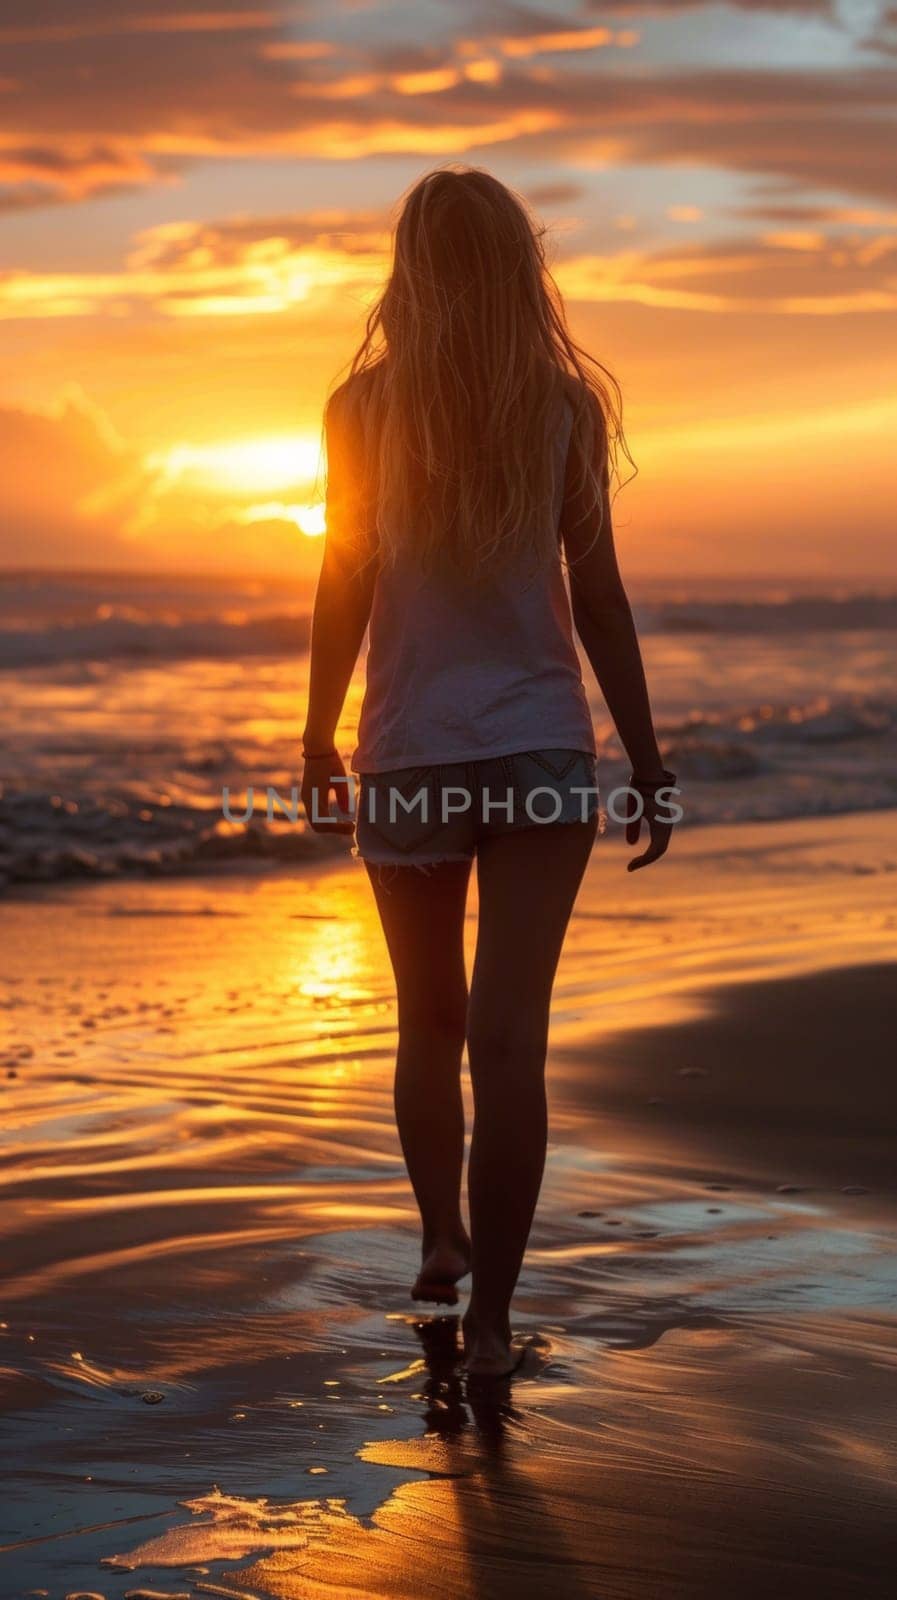 A woman walking on the beach at sunset with her hair blowing in the wind